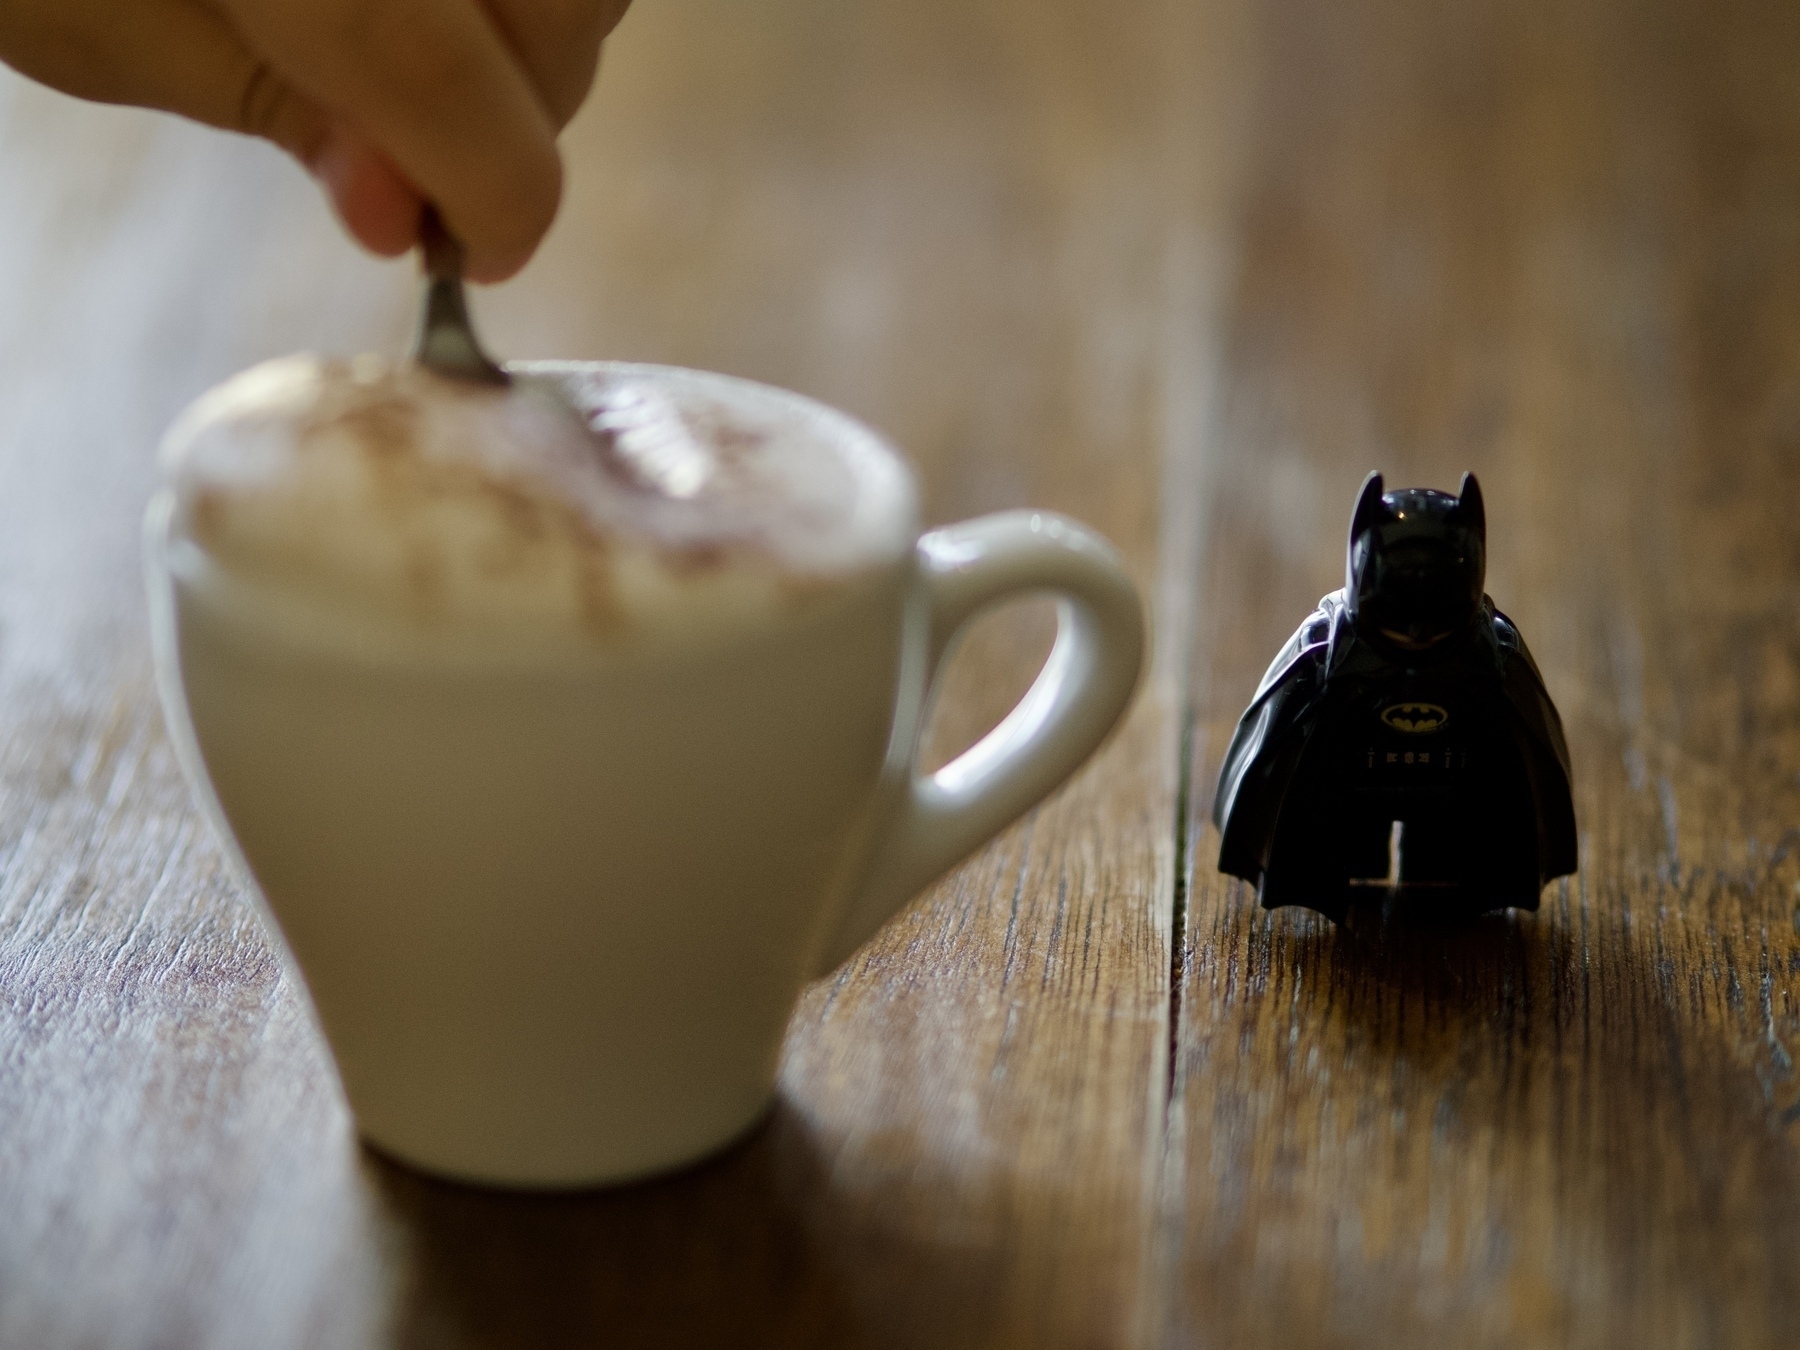 A toddler's hand with a spoon above a small cup with froth, next to a Lego Batman figure on a wooden table